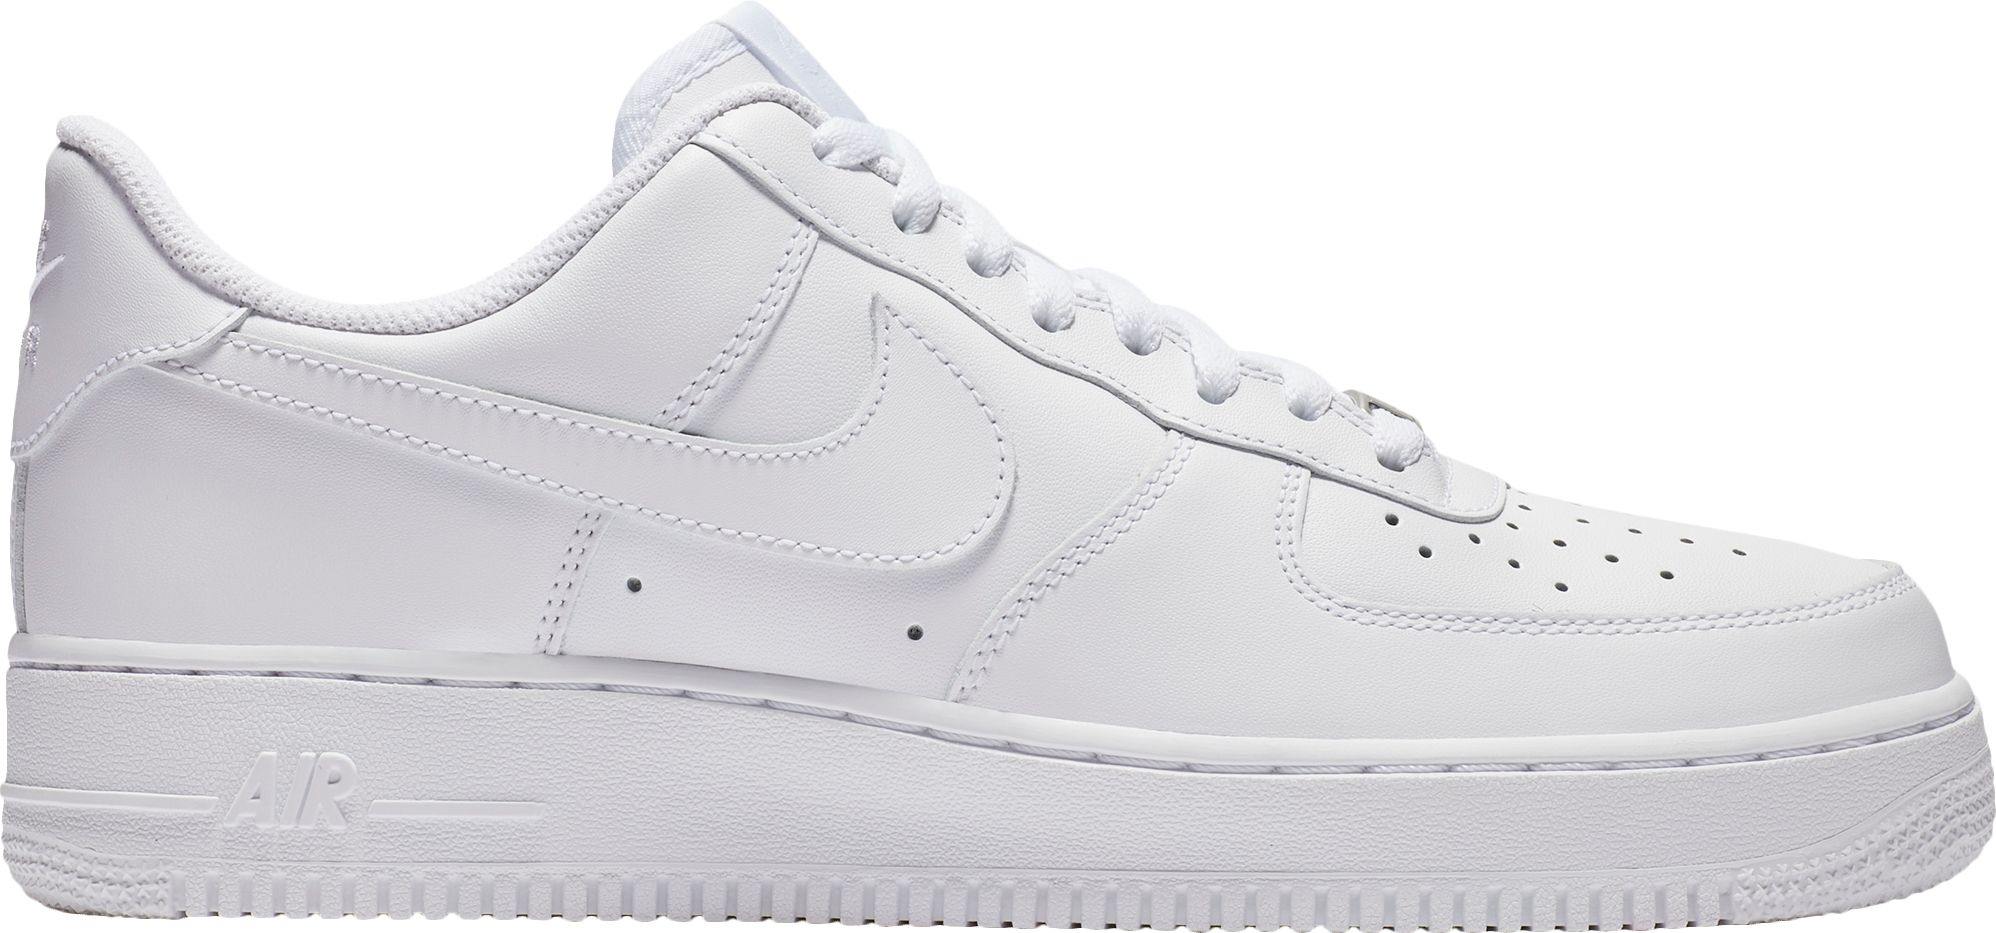 white air force 1 womens size 7.5